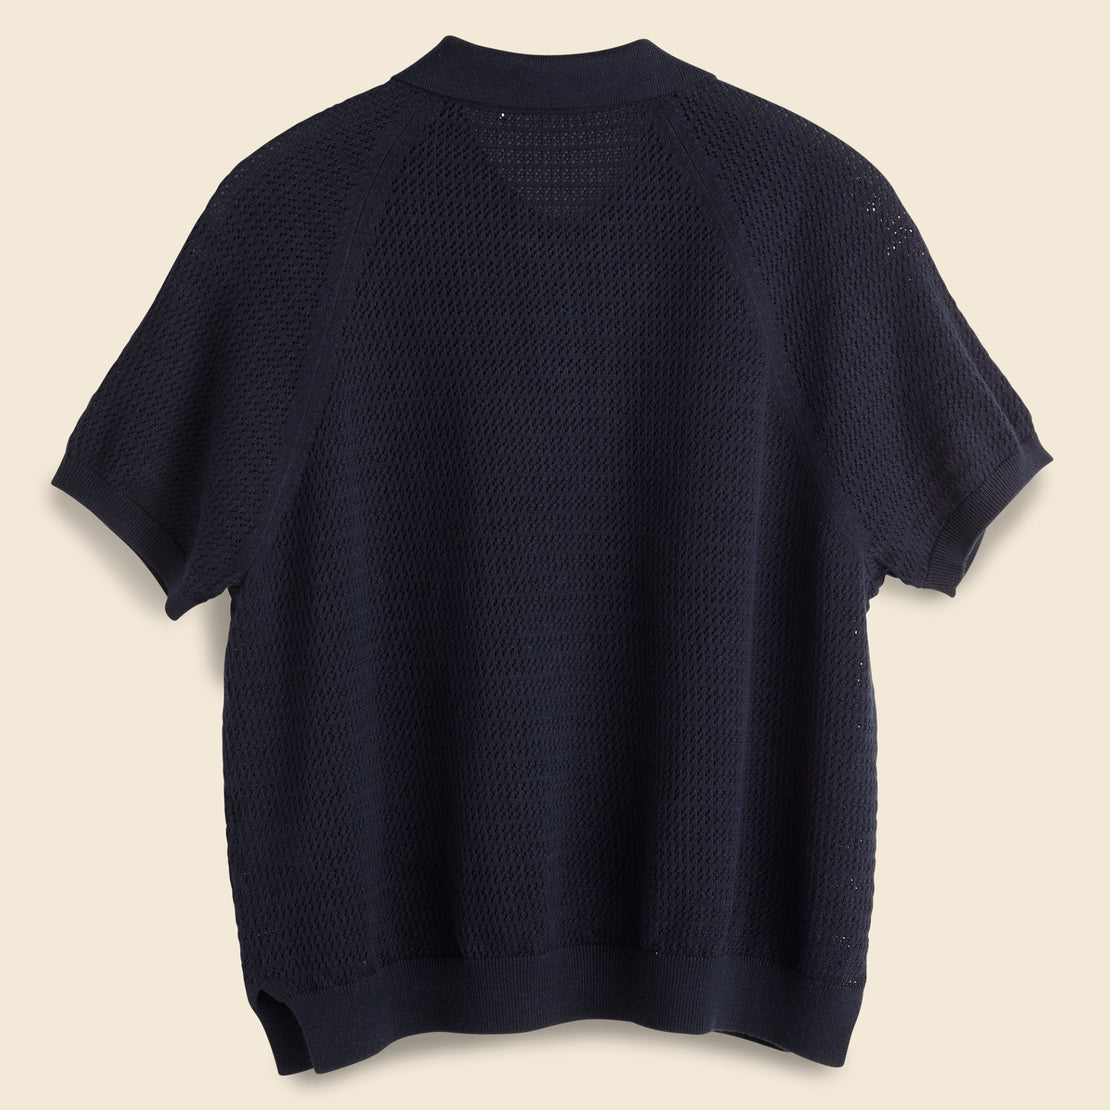 Zoe Sweater Polo - Navy - Alex Mill - STAG Provisions - W - Tops - S/S Knit